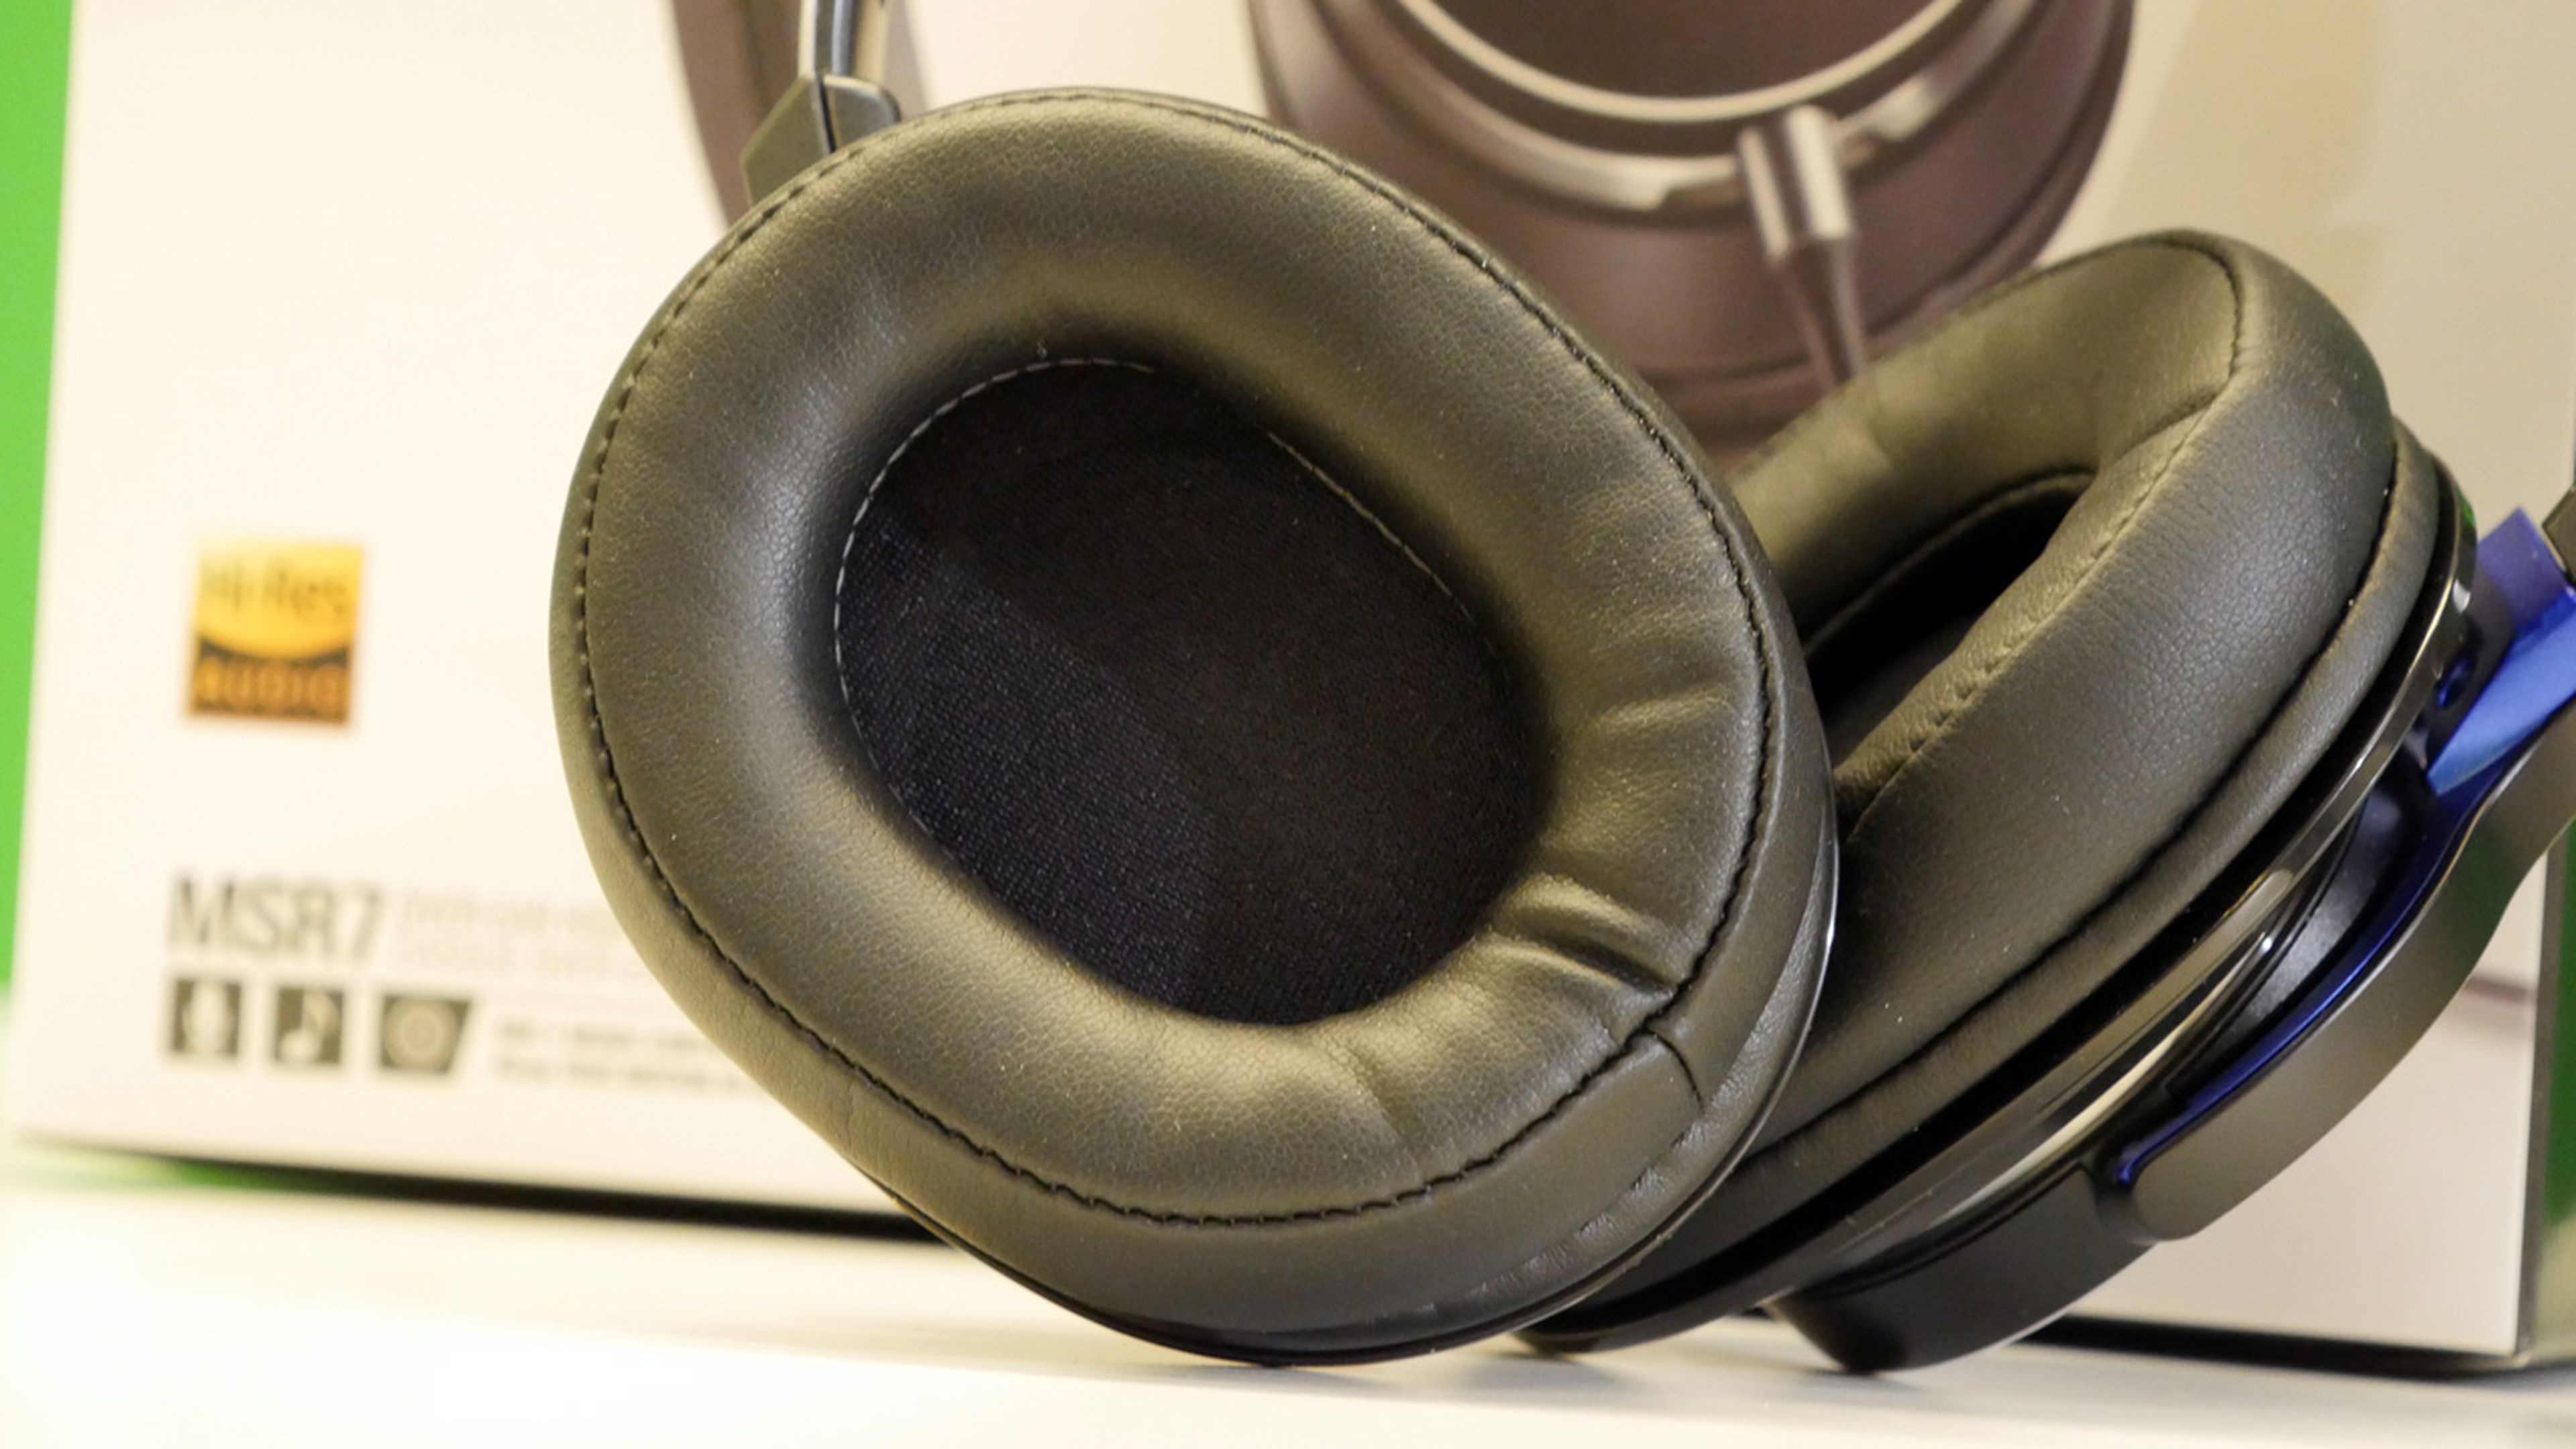 Review Auriculares Audio Technica ATH-MSR7